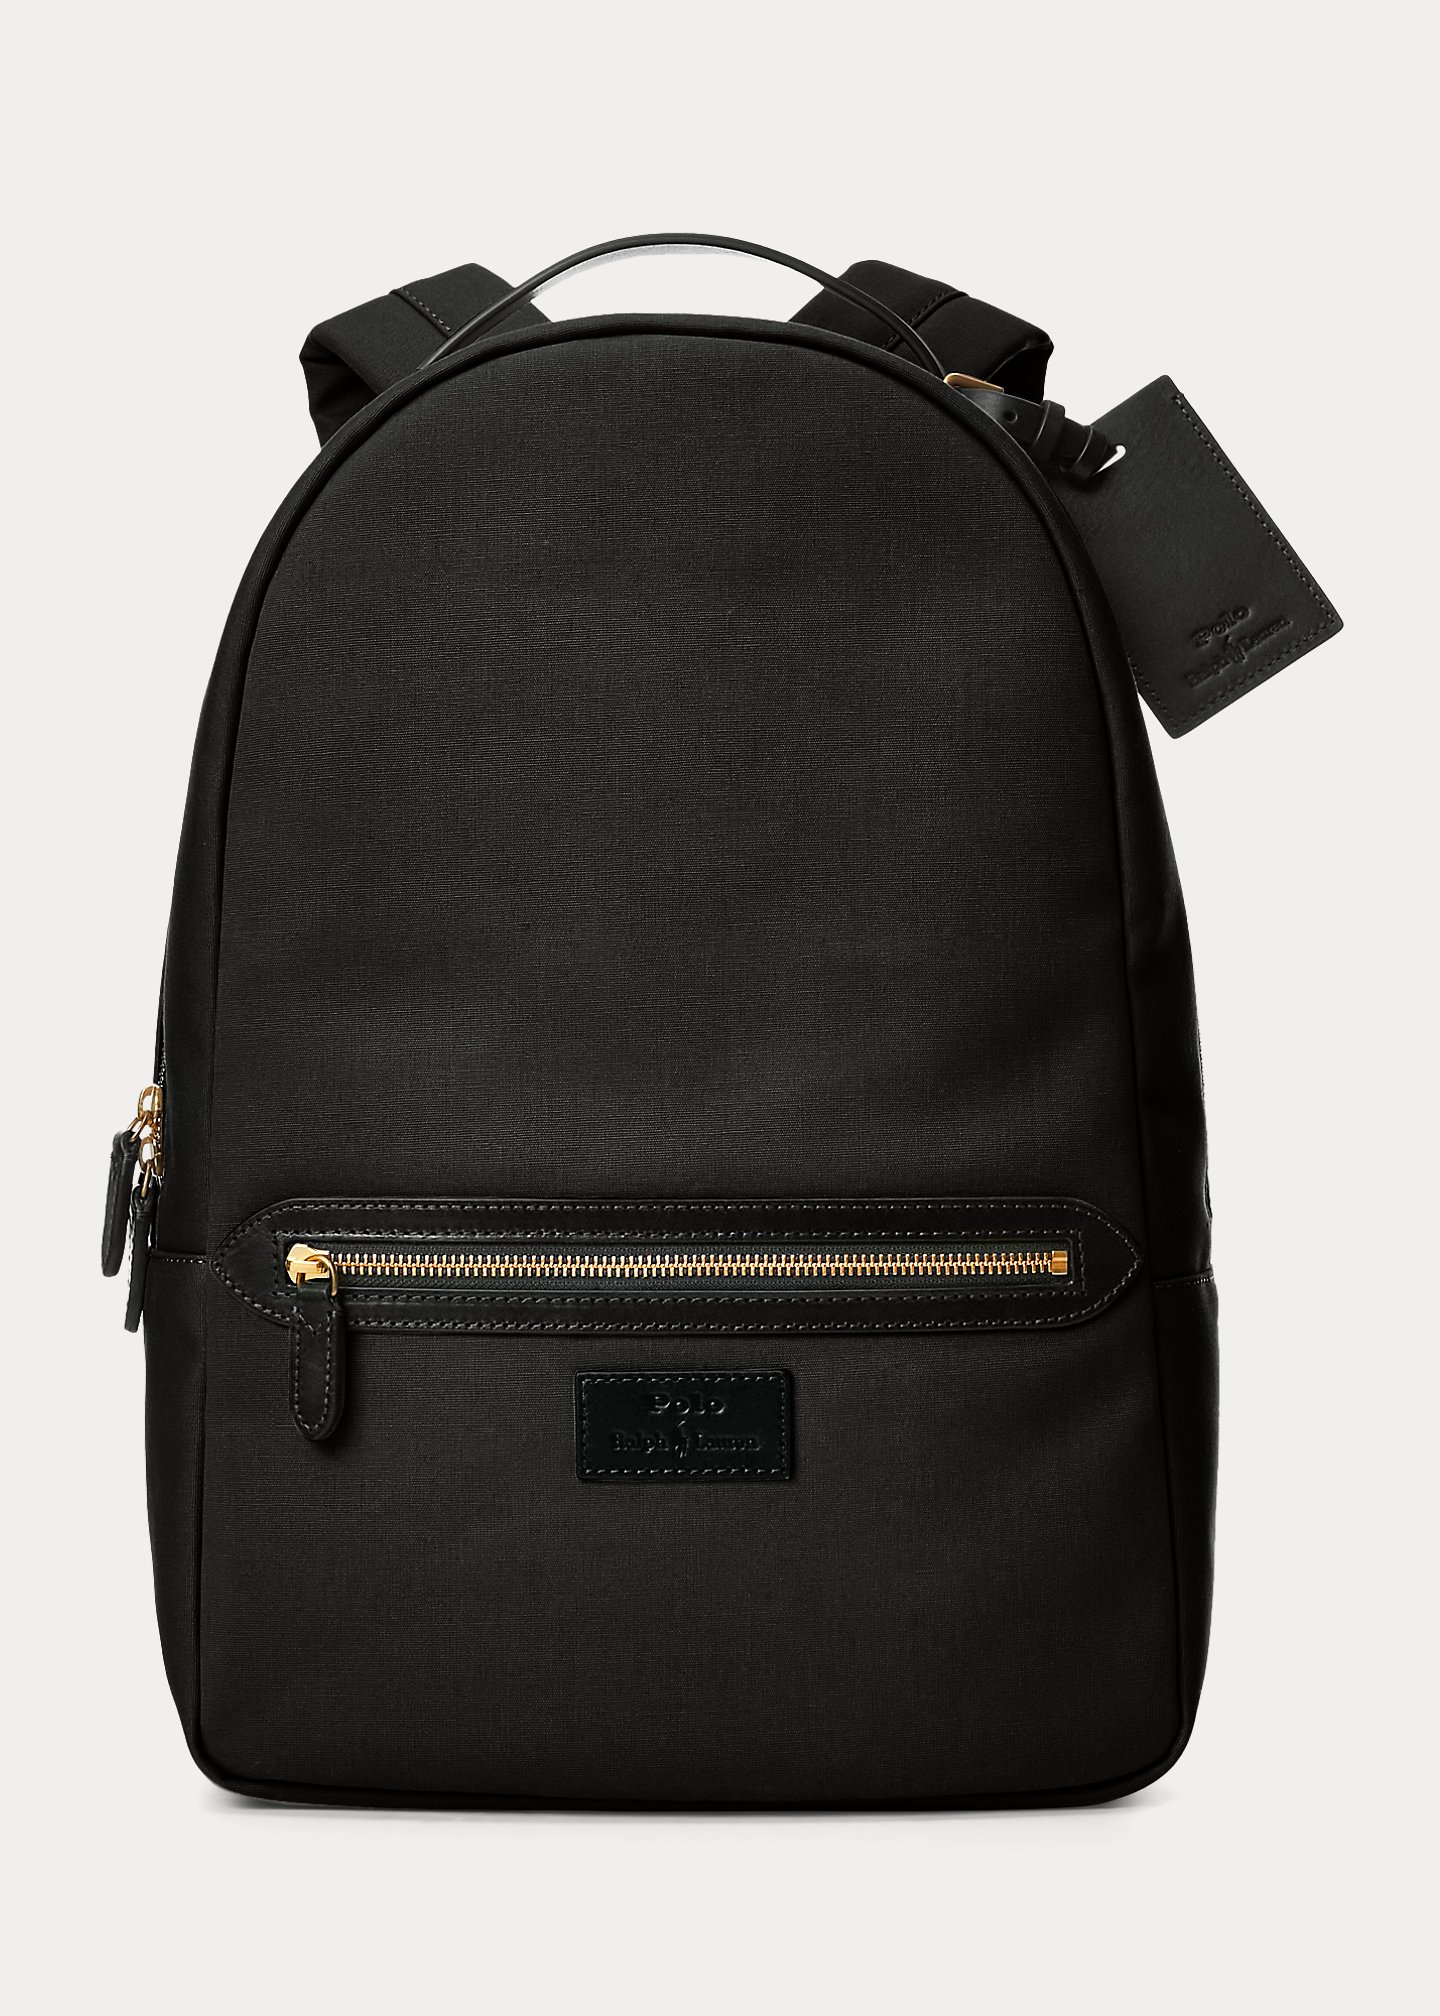 POLO RALPH LAUREN Leather-Trim Canvas Backpack in Black/Black | Endource